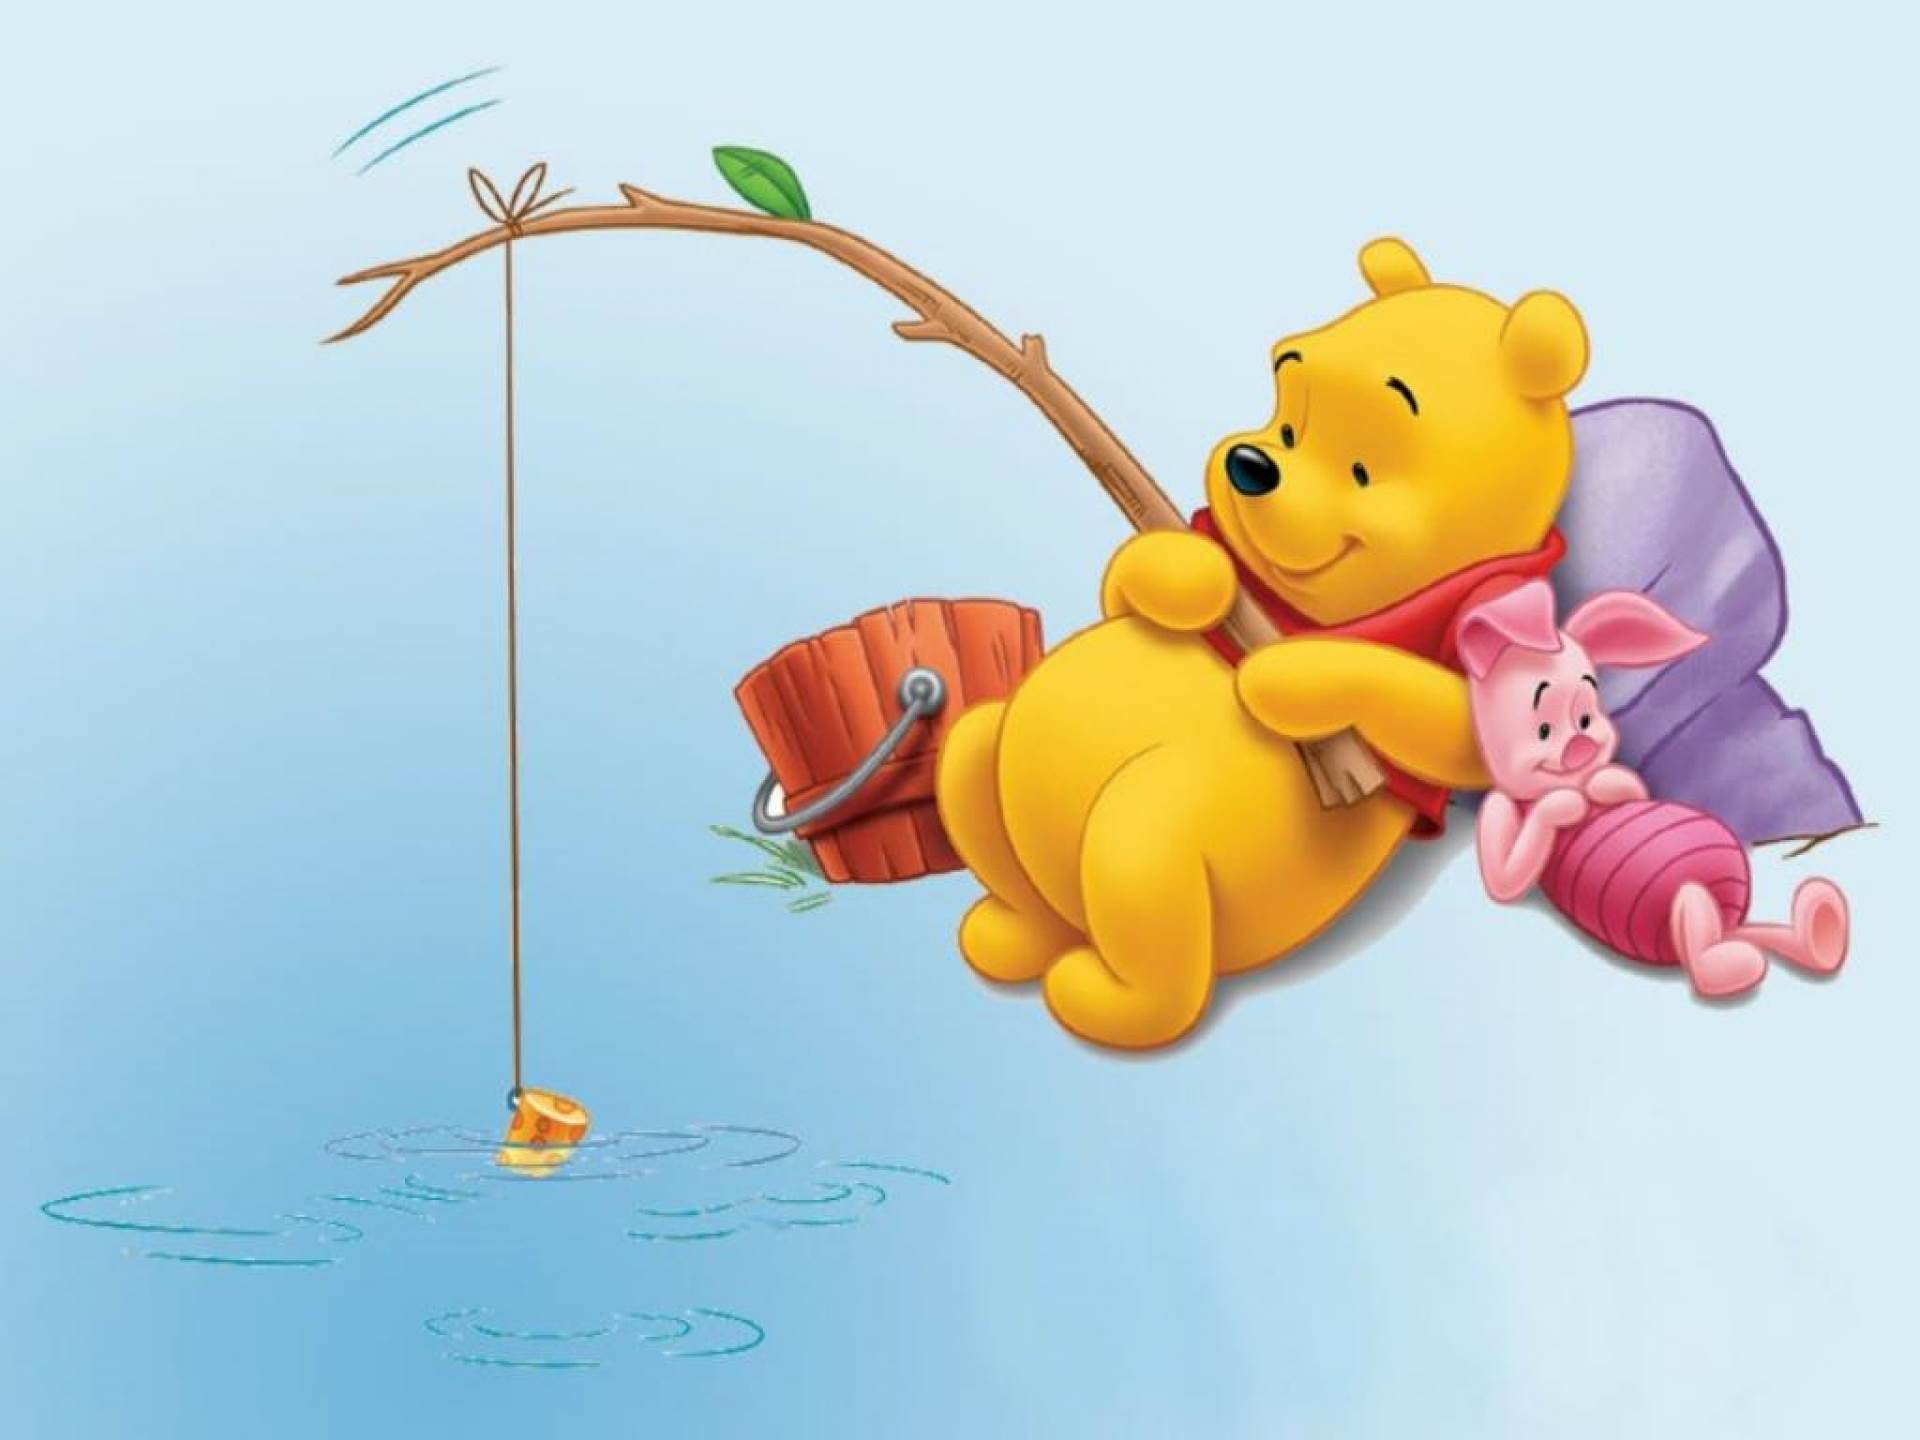 Winnie The Pooh Full Hd Wallpaper Image For Iphone - Pooh Cartoon Character  - 1920x1440 Wallpaper 